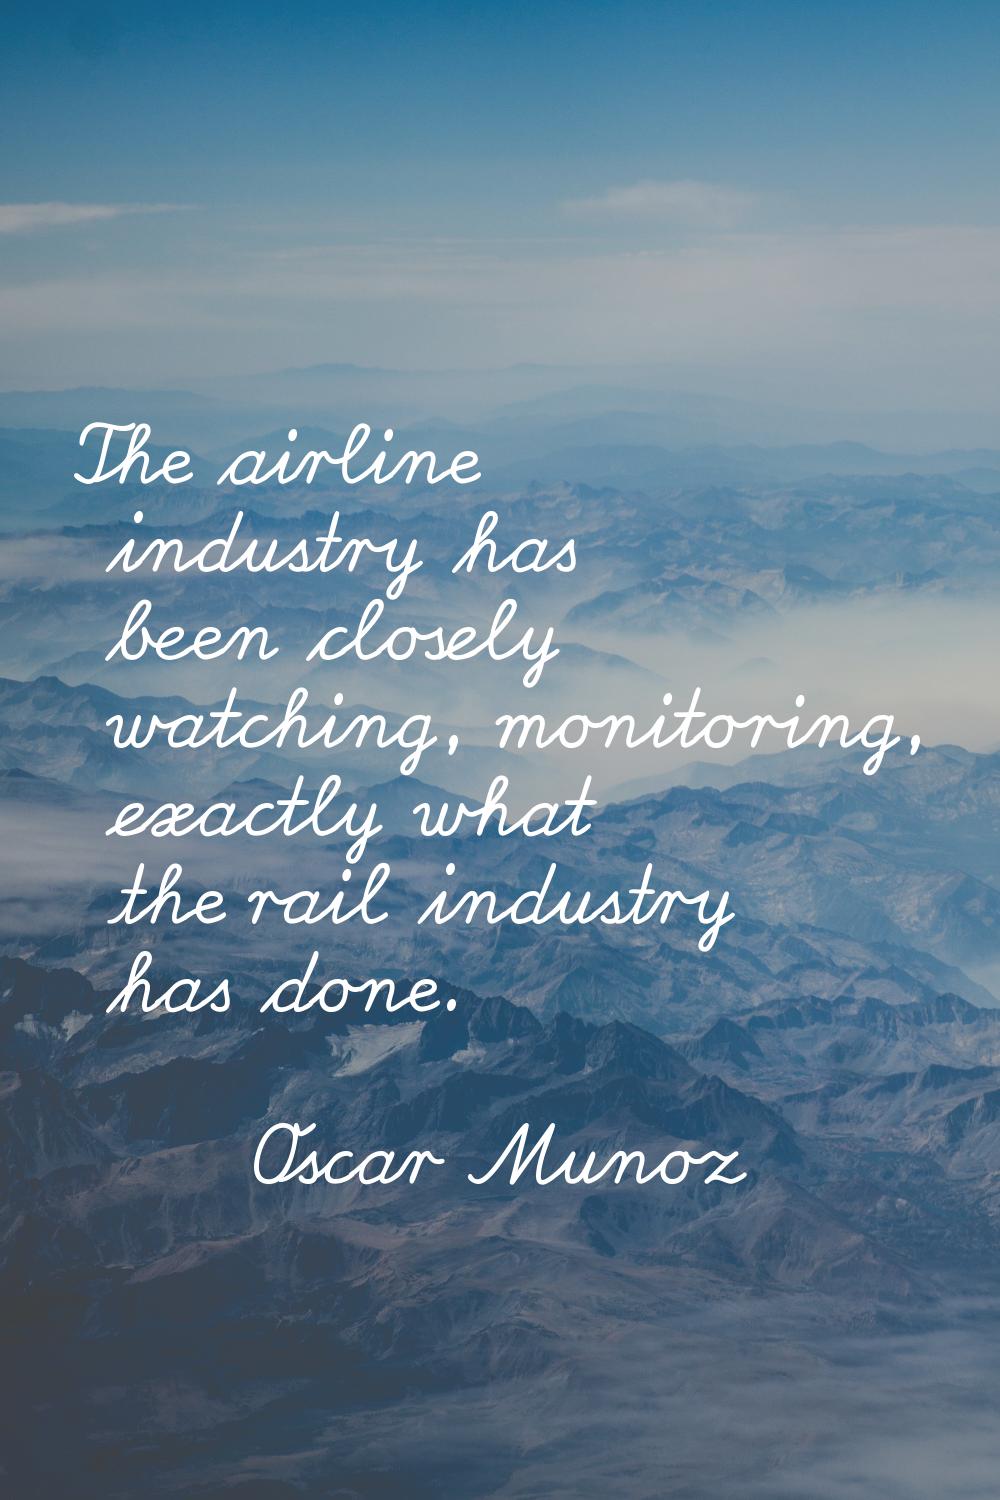 The airline industry has been closely watching, monitoring, exactly what the rail industry has done